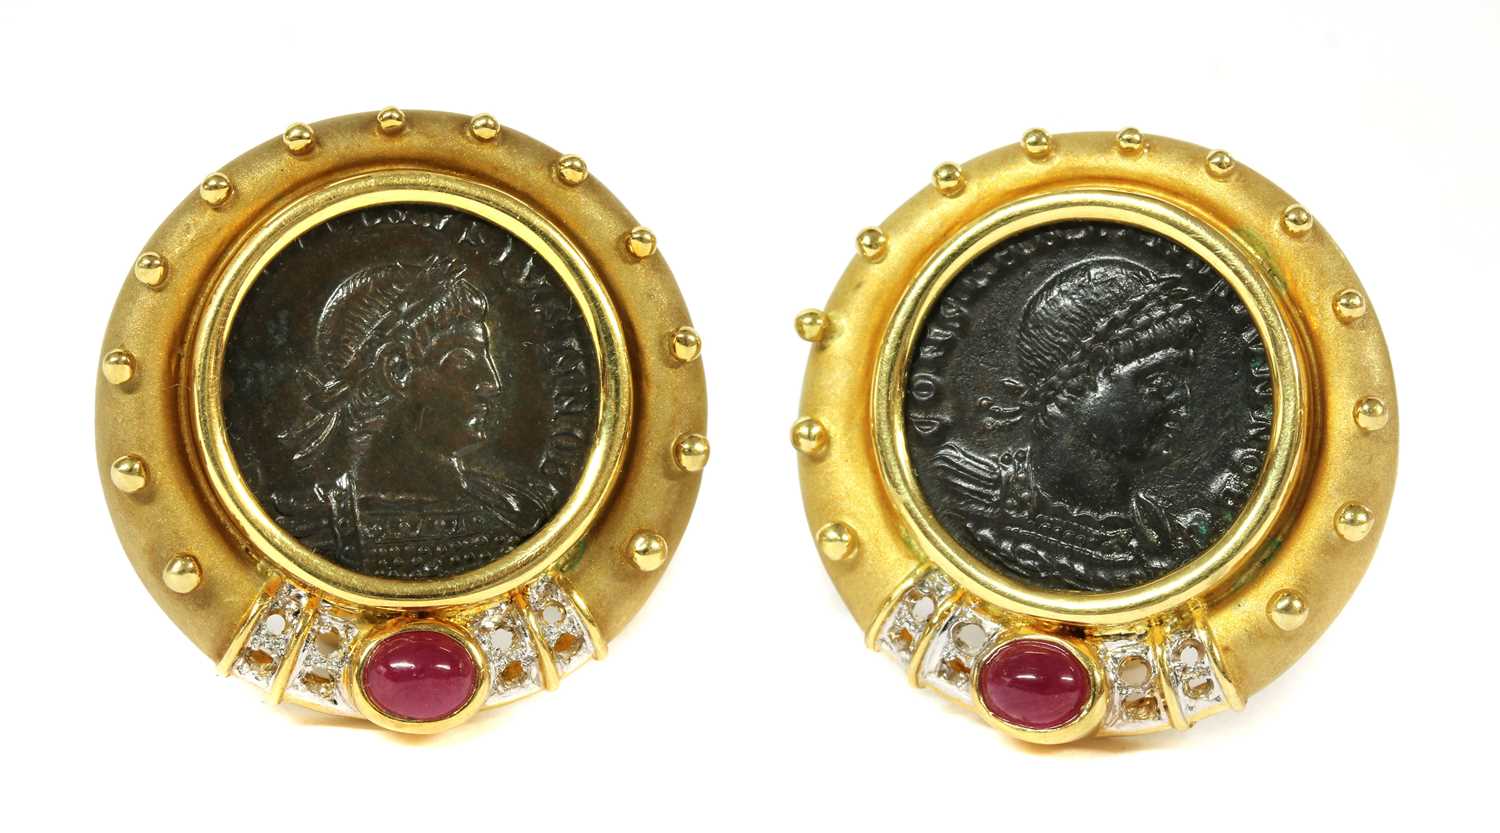 Lot 41 - A pair of gold-mounted Roman coin earrings